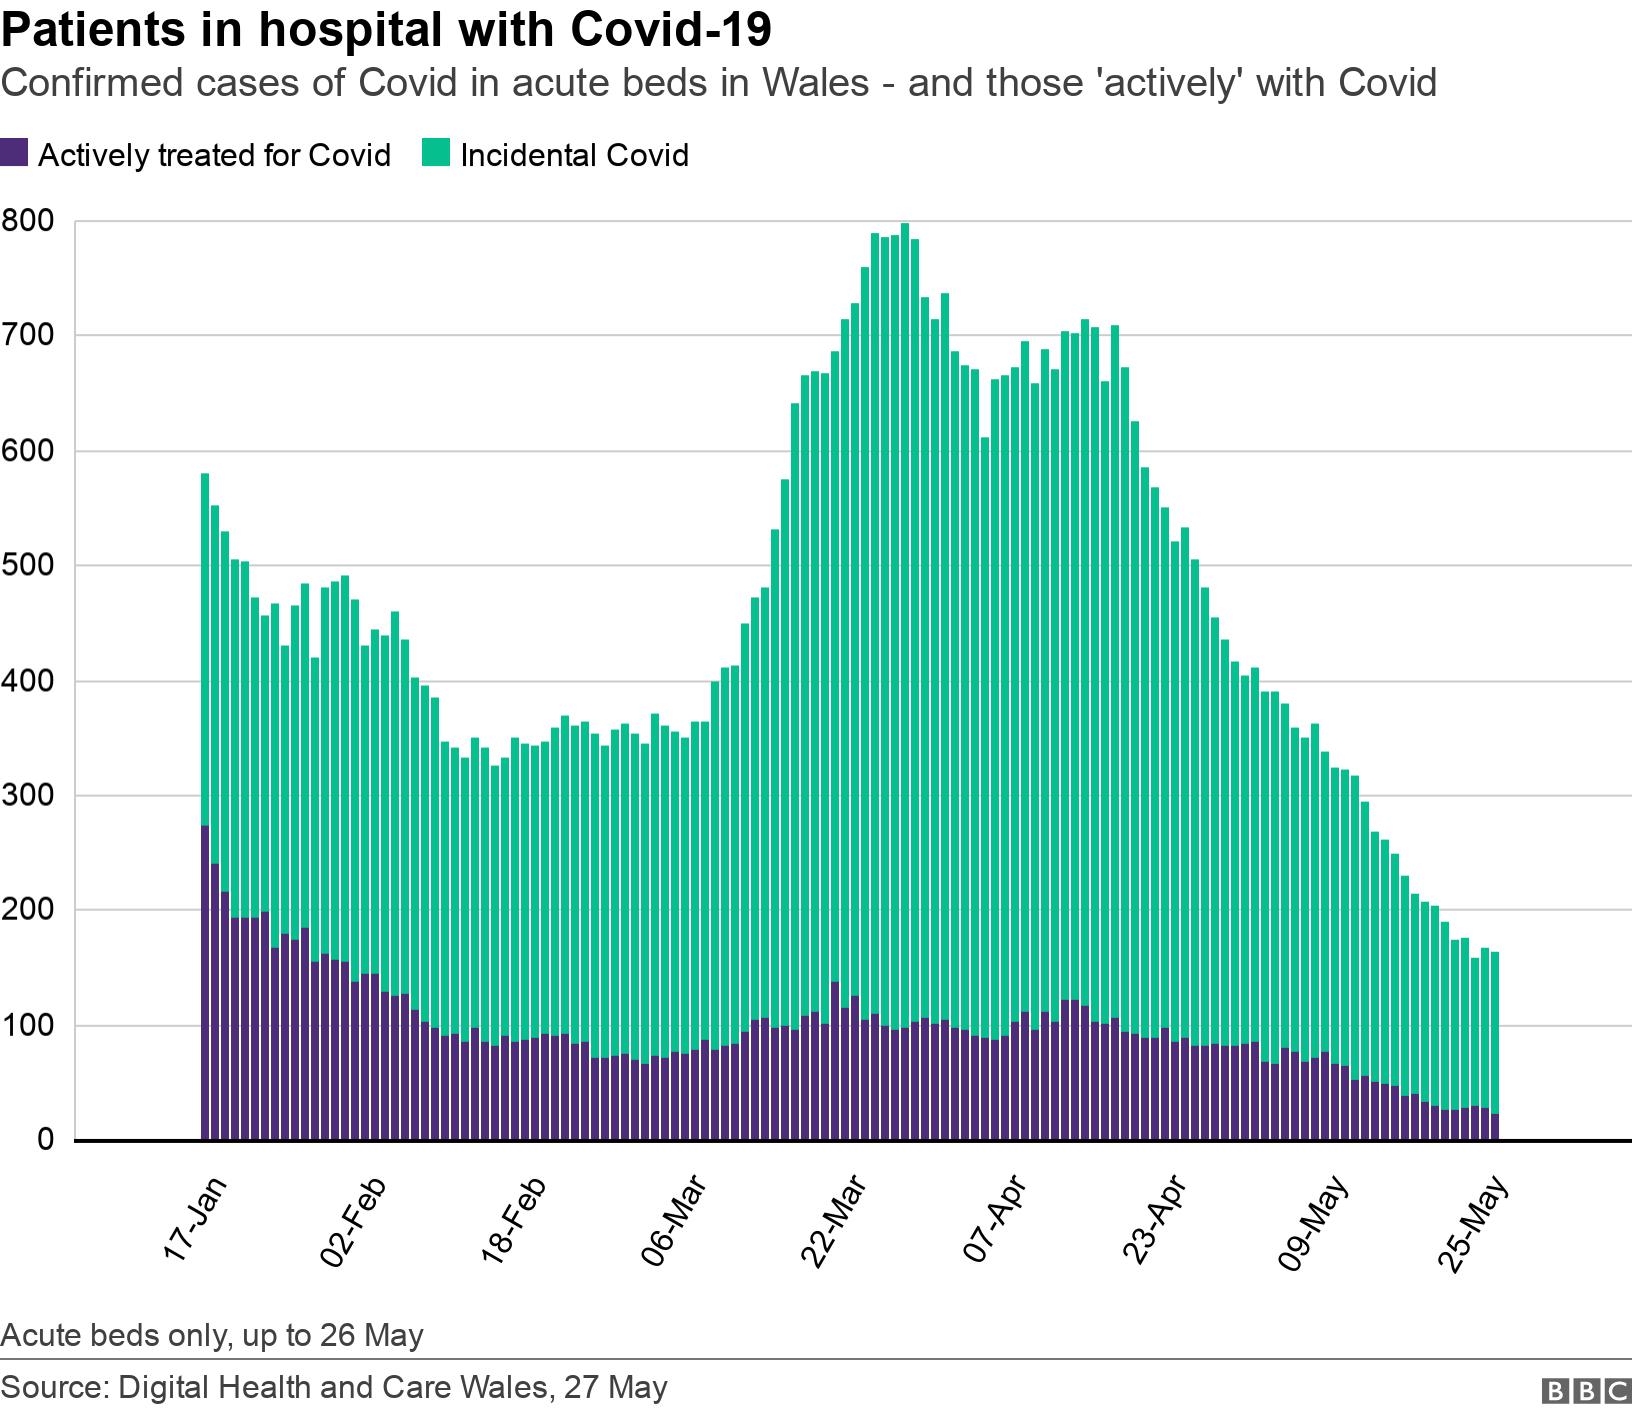 Patients in hospital with Covid-19. Confirmed cases of Covid in acute beds in Wales - and those 'actively' with Covid.  Acute beds only, up to 26 May.